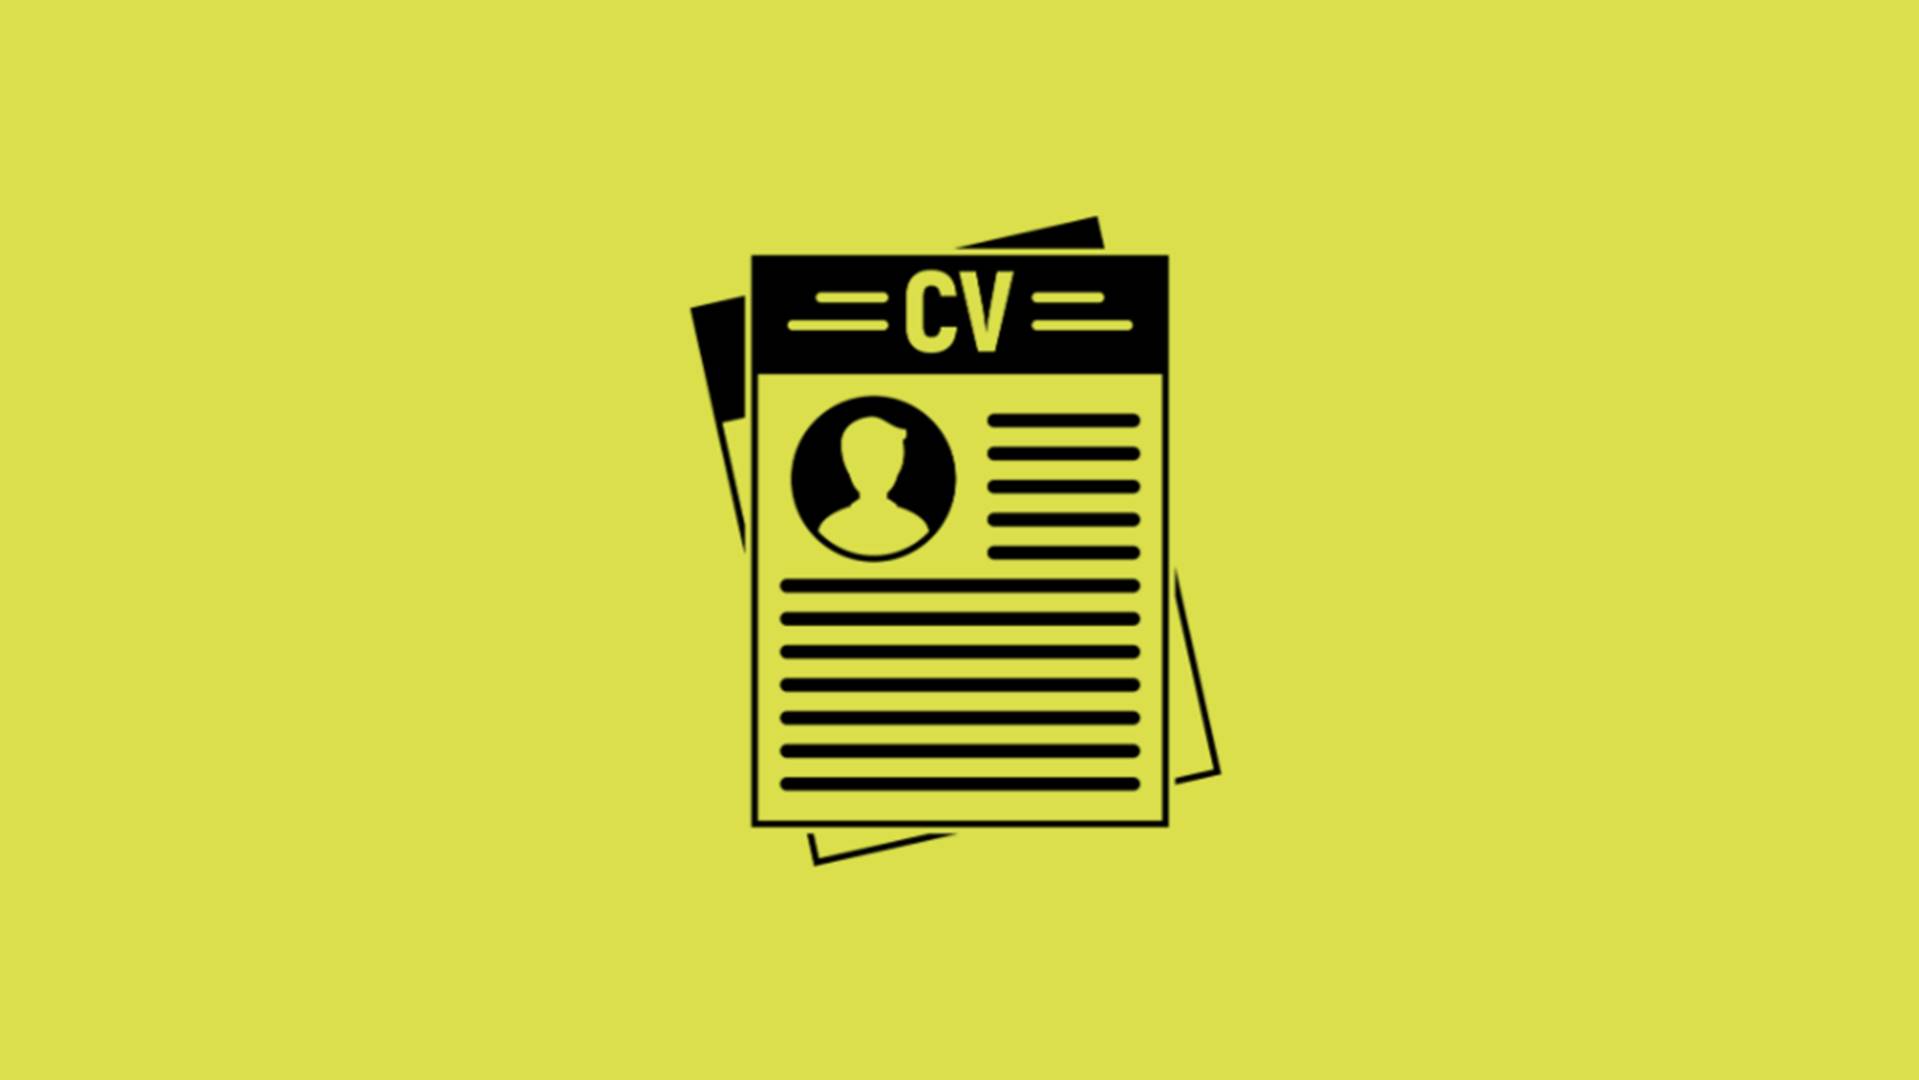 Neurodiversity: using a CV - who misses out?